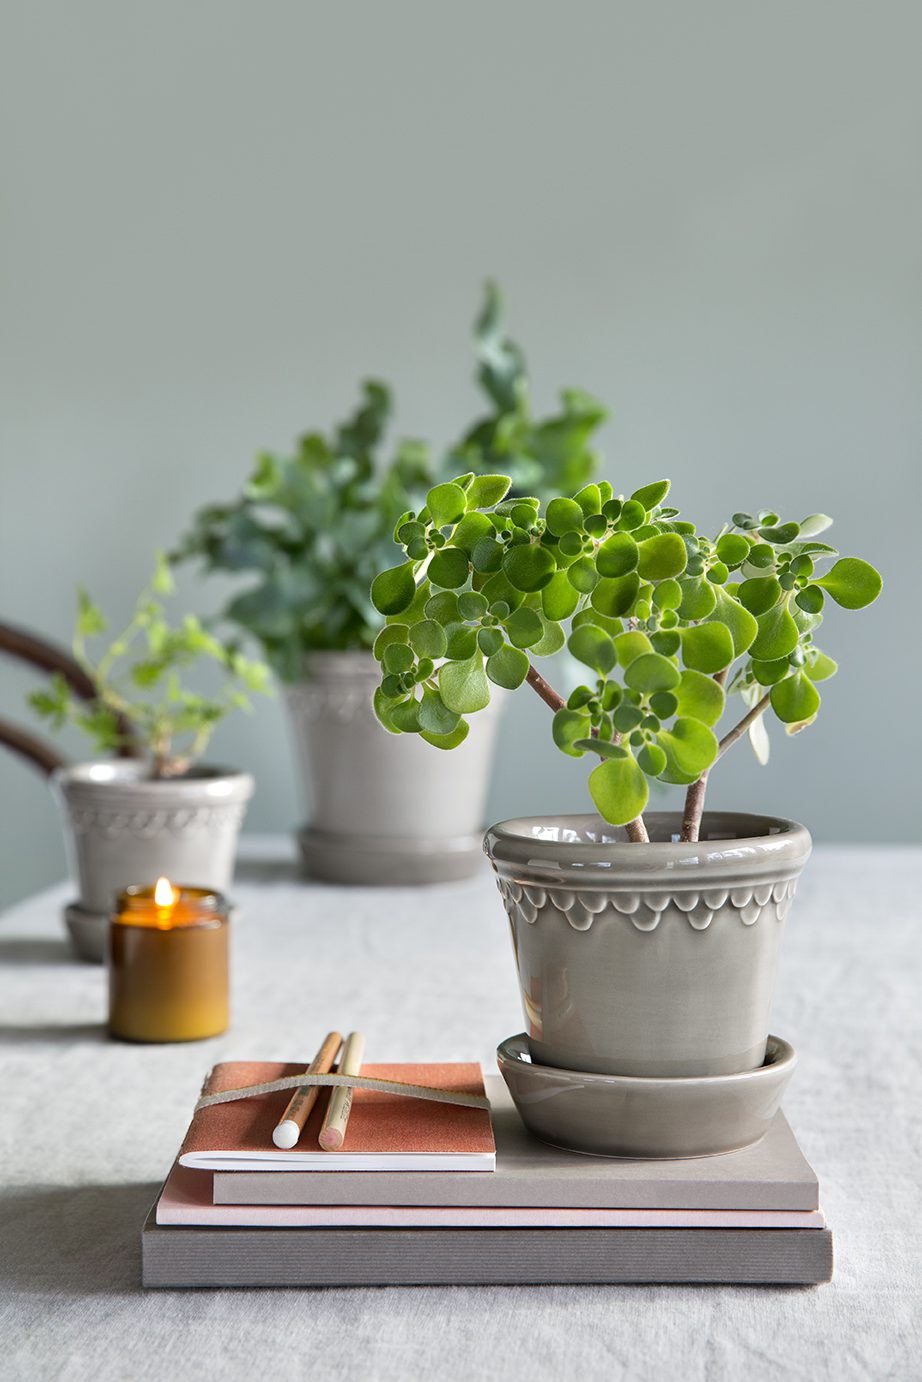 Glazed pearl grey pots with plants in a lifestyle setting.